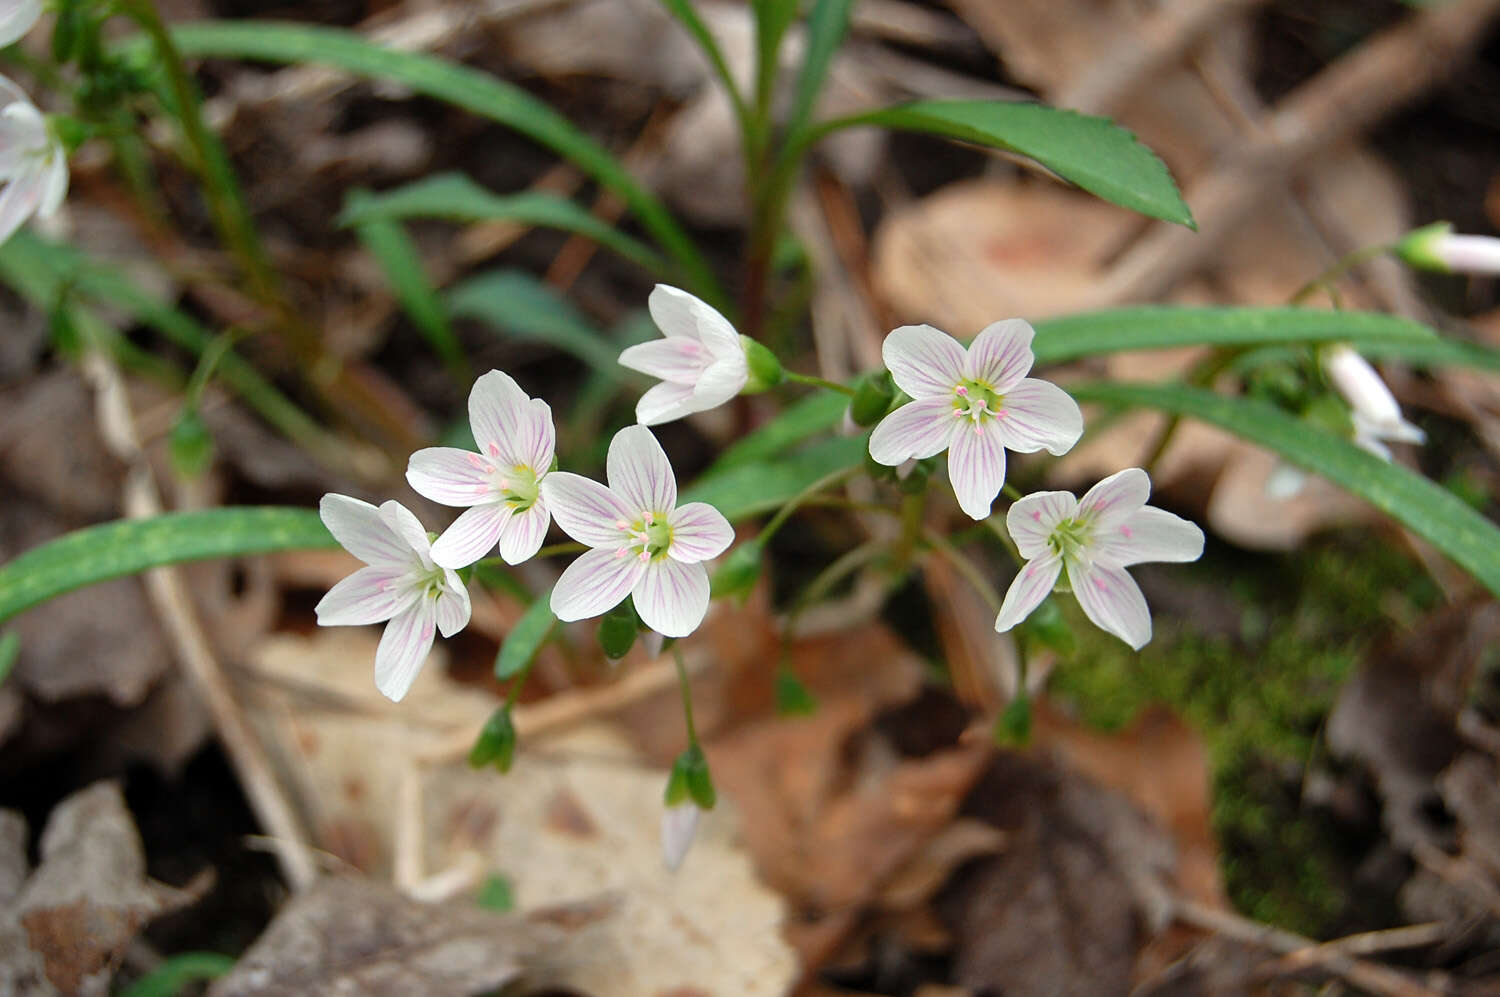 Image of springbeauty